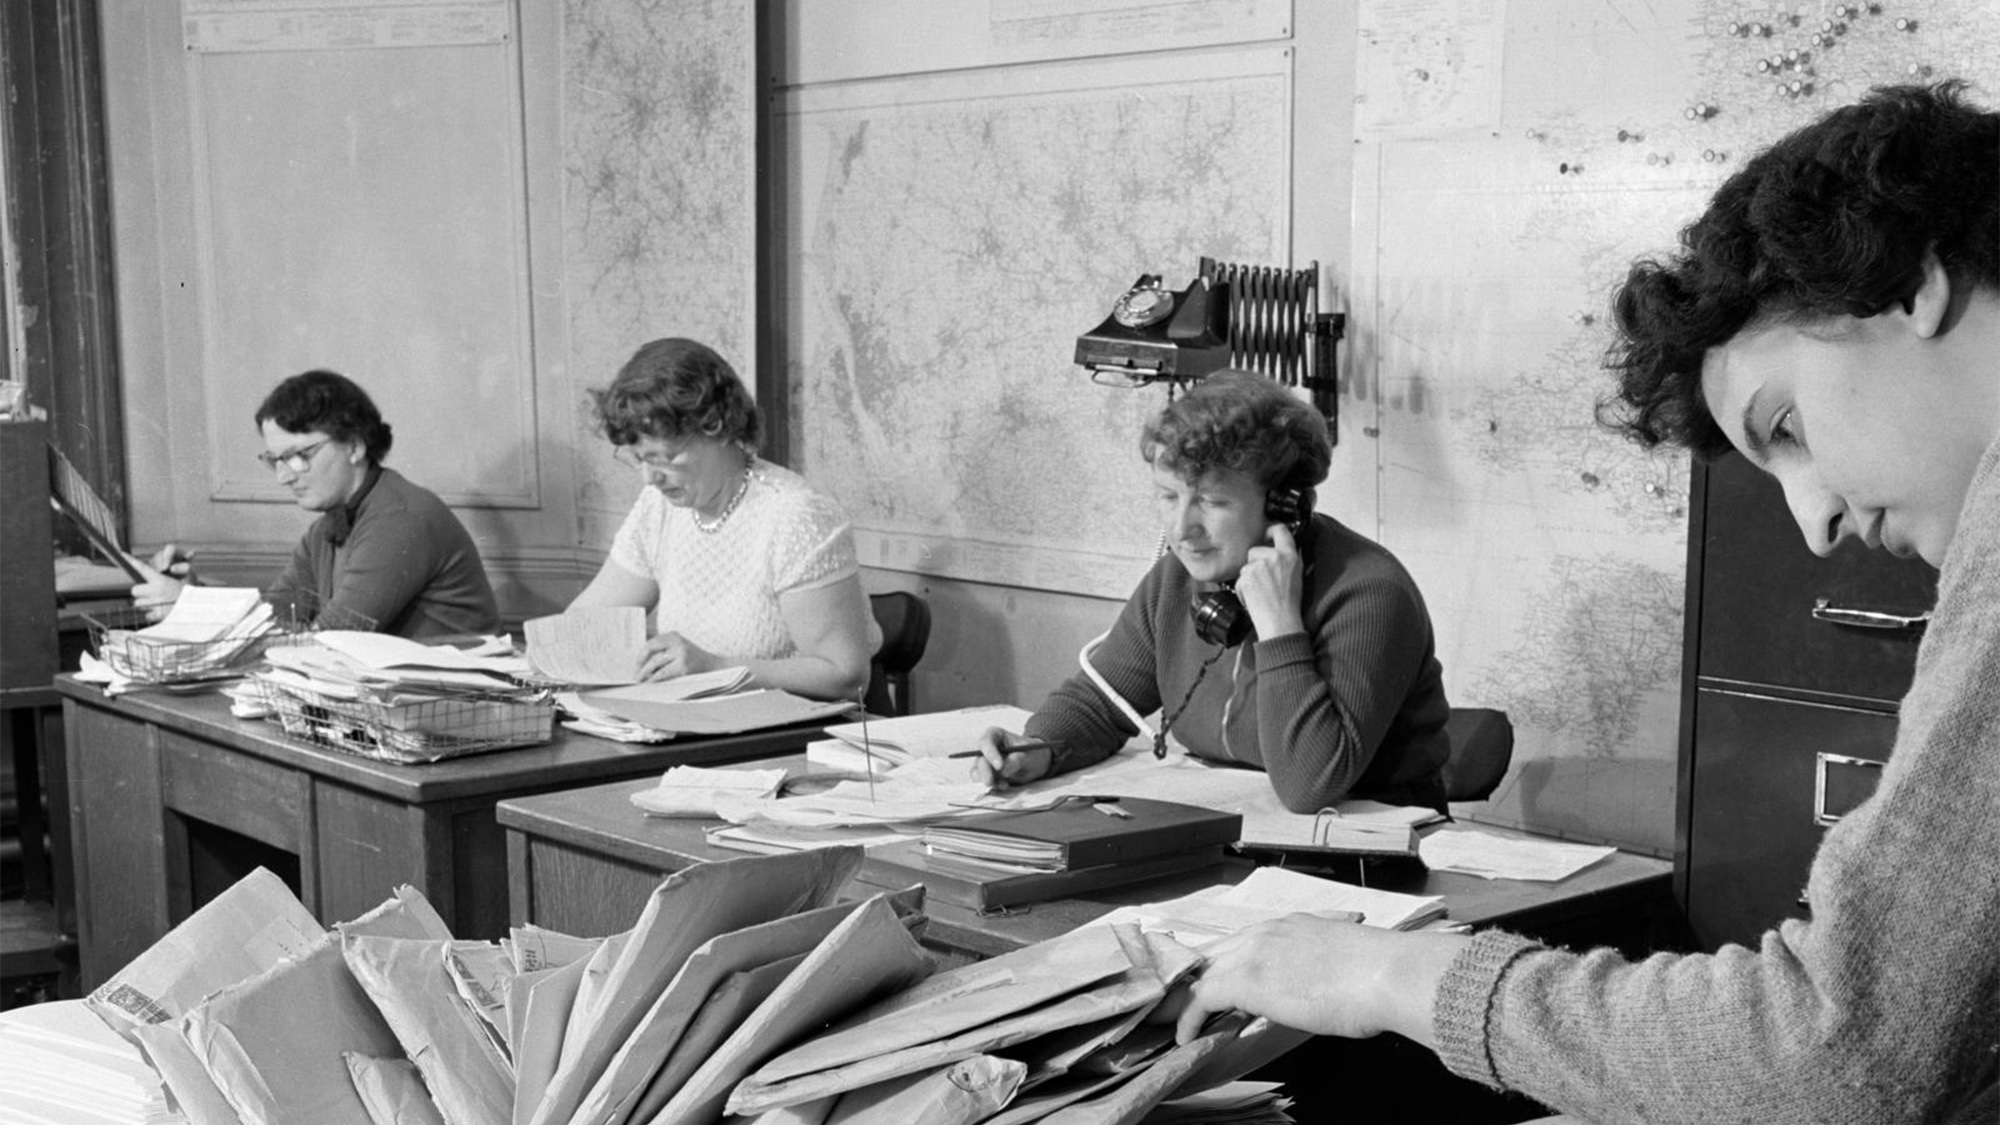 Black and white photo of women working in an office, 1956.